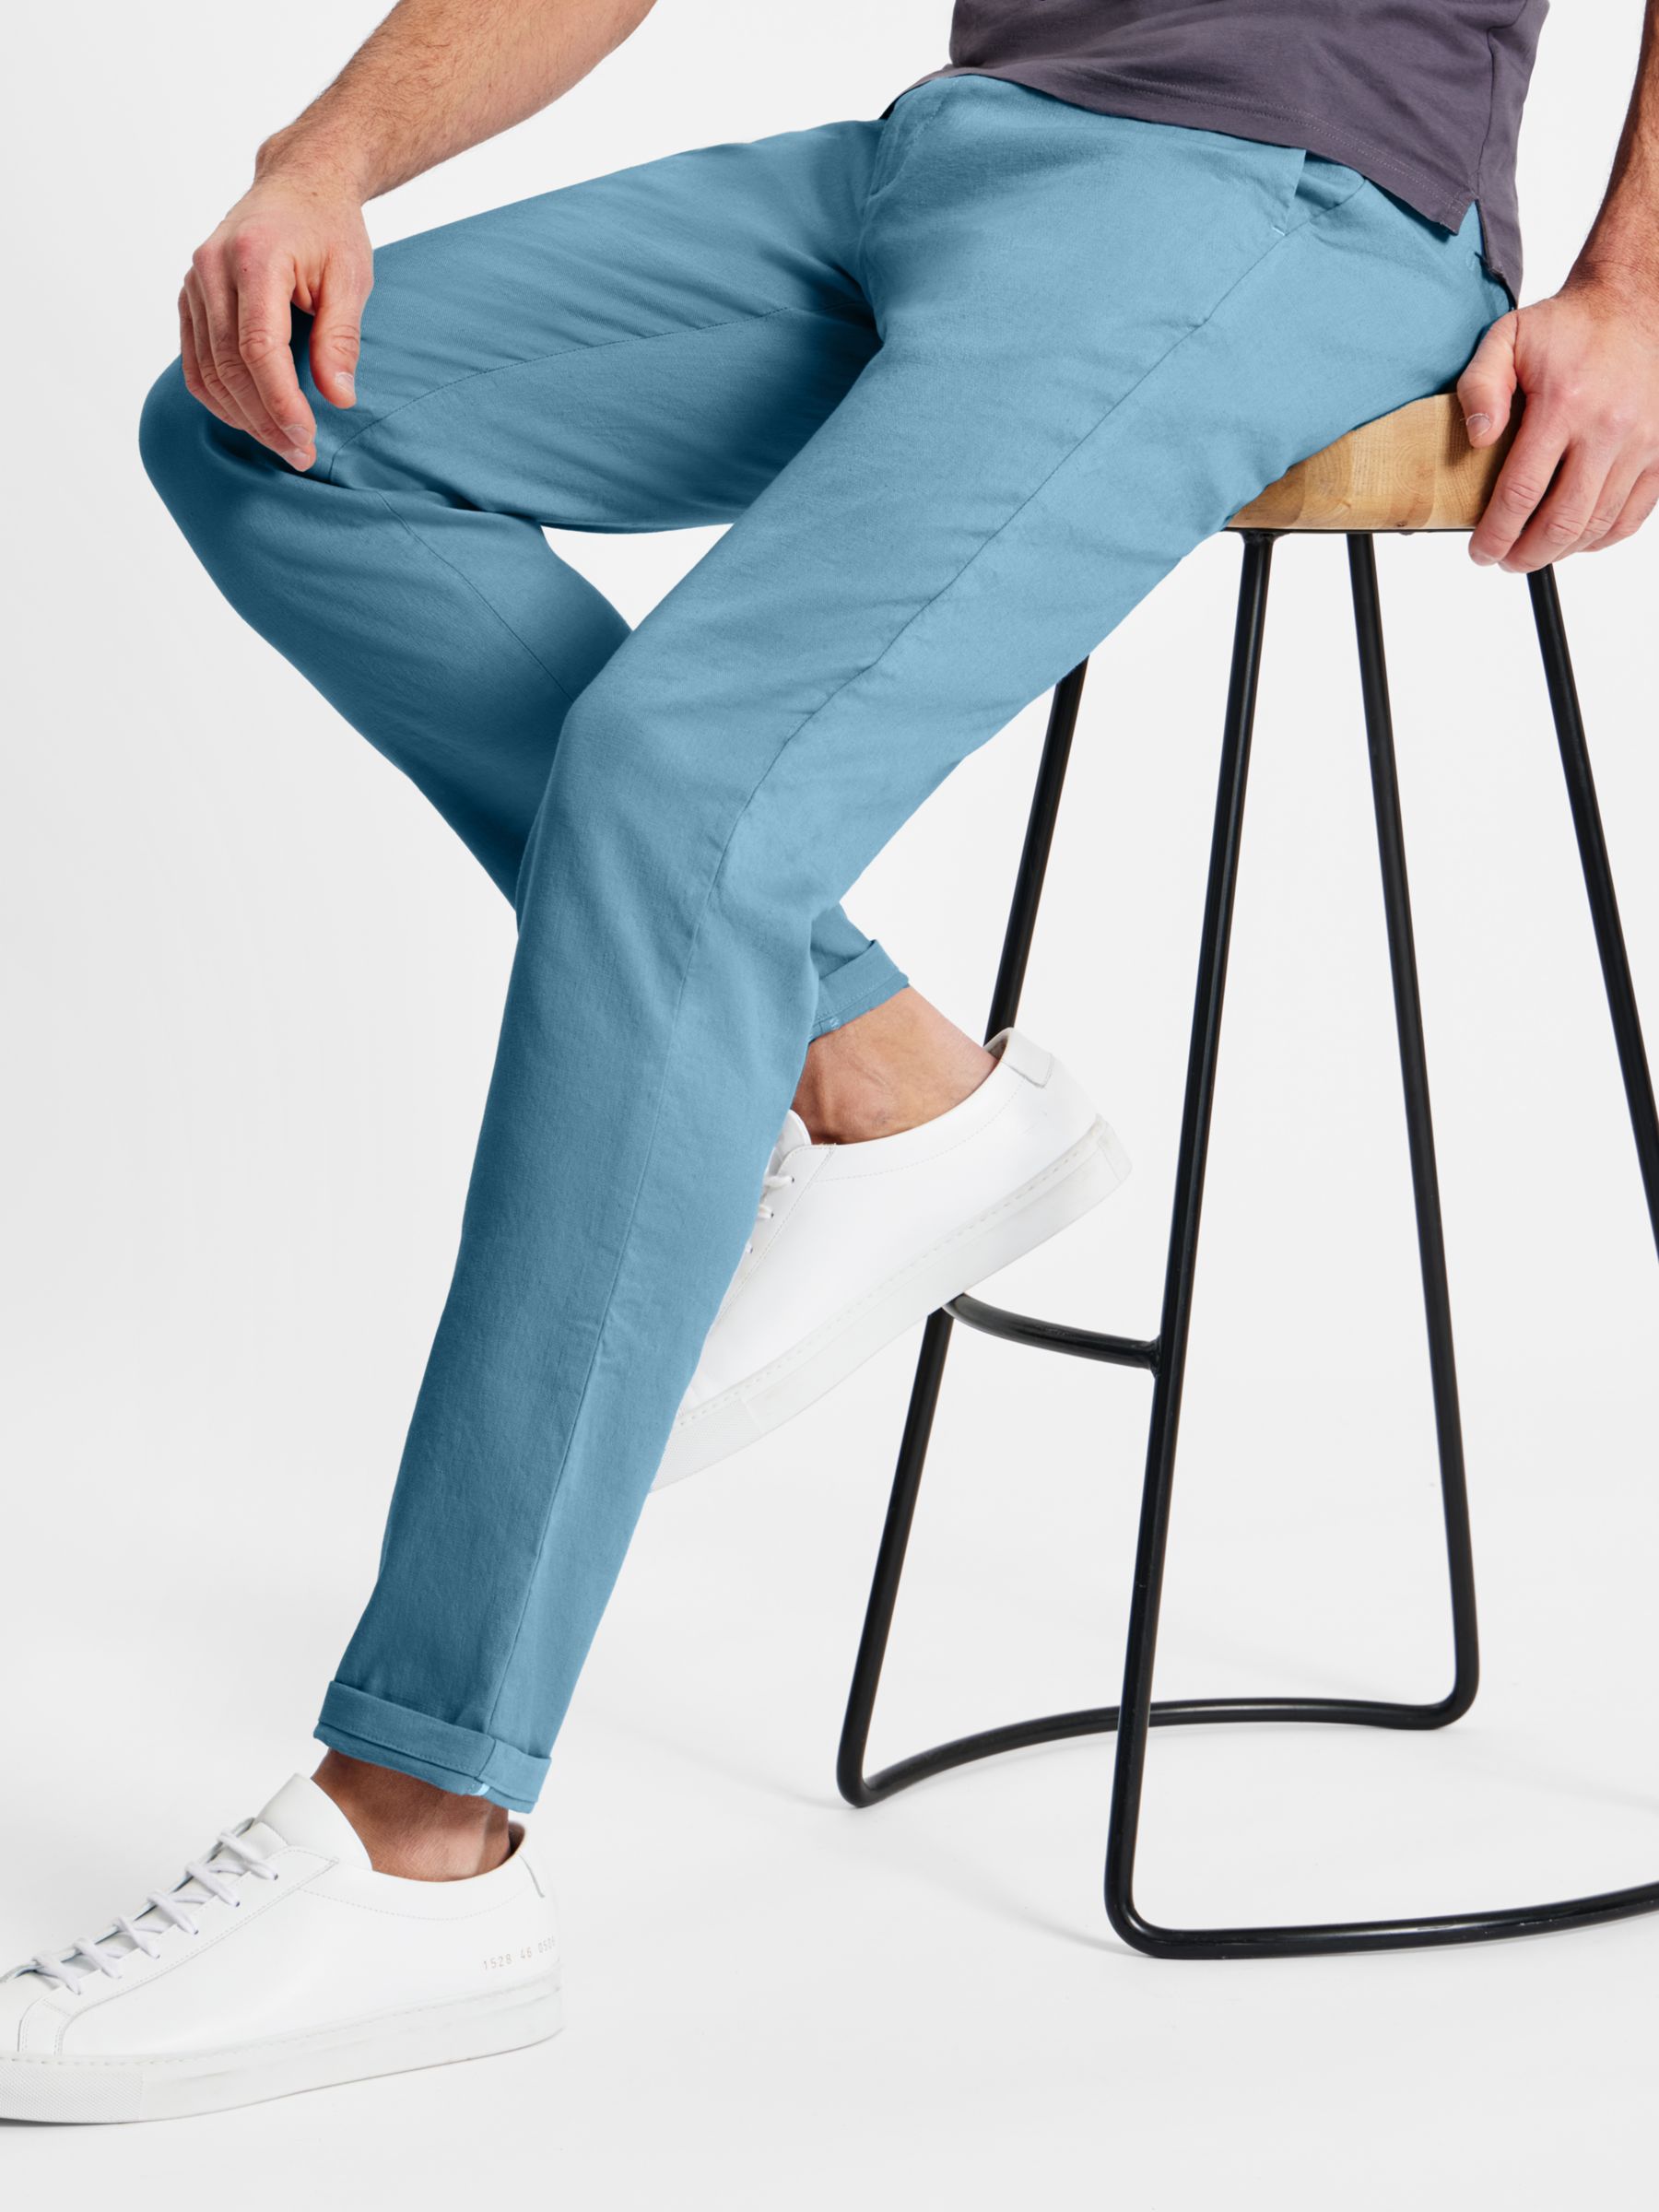 Buy SPOKE Linen Sharps Broad Thigh Trousers Online at johnlewis.com